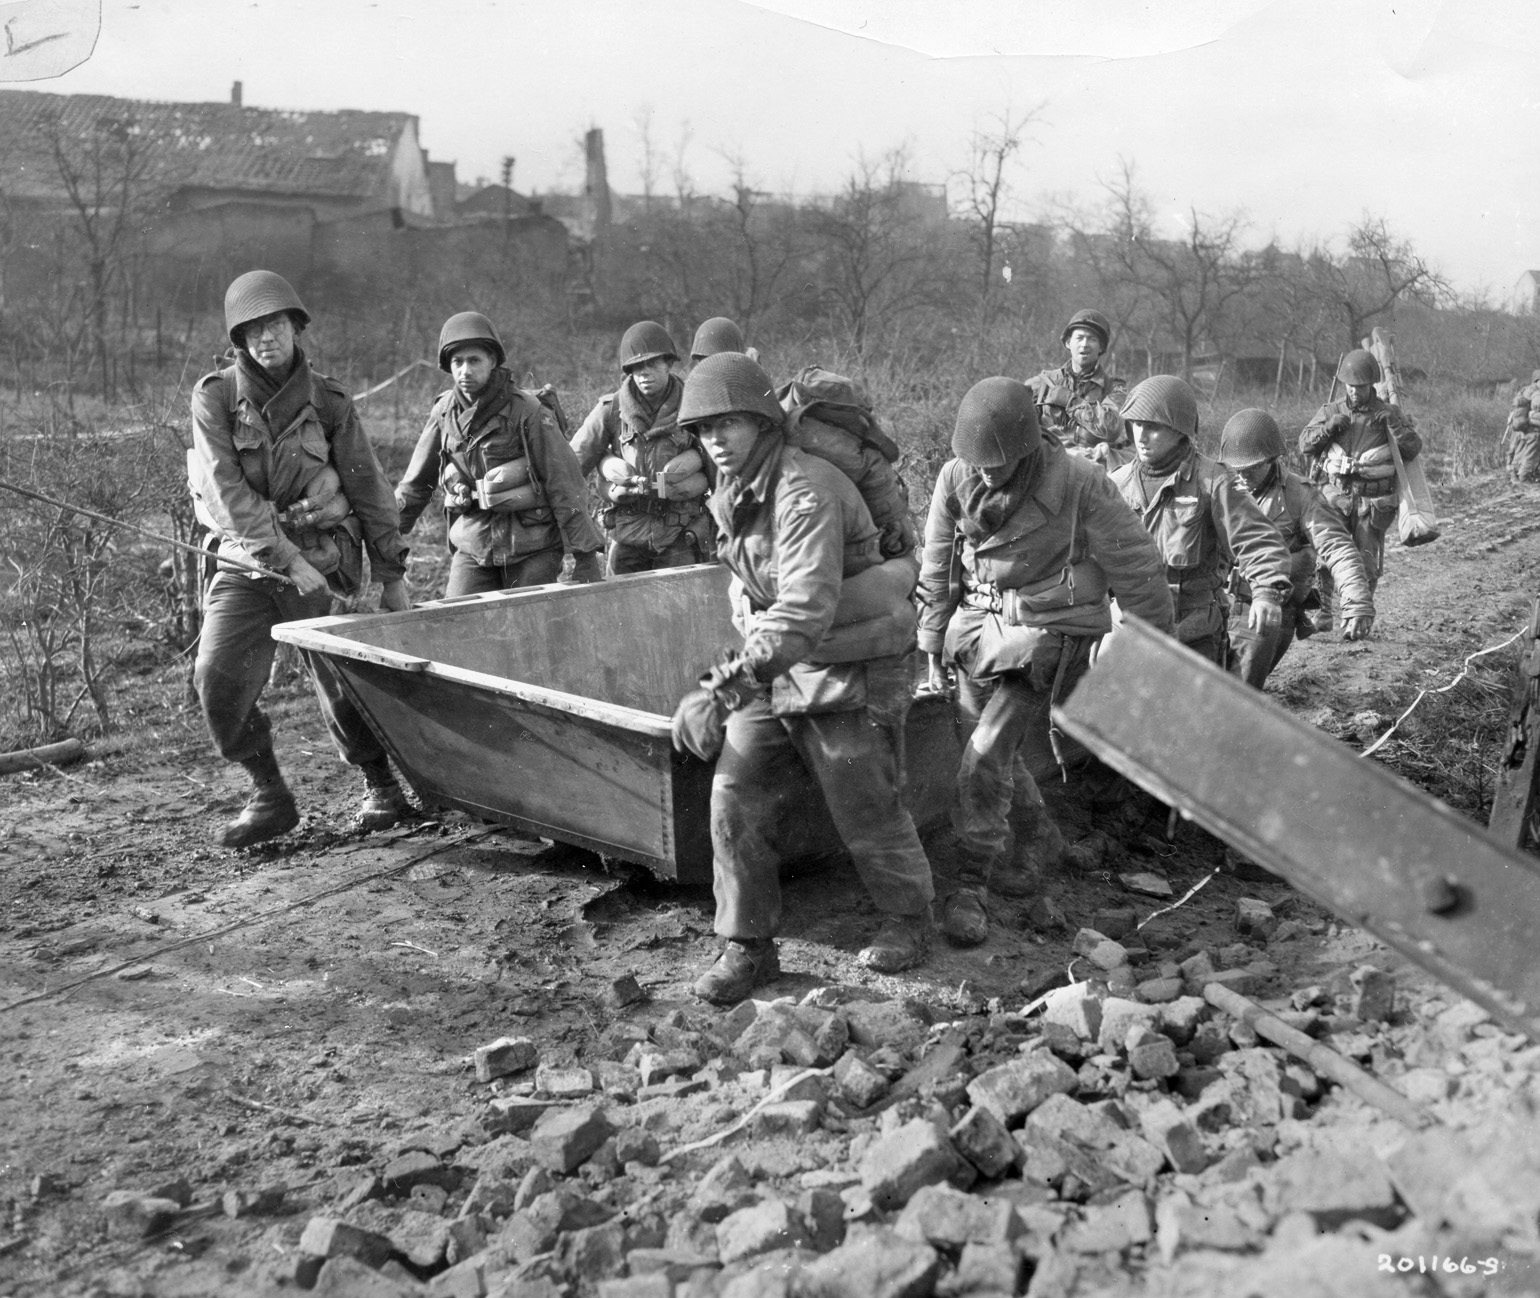 Combat engineers drag flat-bottomed assault boats toward the banks of the Roer River near Linnich, Germany, February 23, 1945, during the opening phase of Operation Grenade. The 84th Infantry Division made the crossing despite days of rain, boggy ground, and stiff enemy resistance.